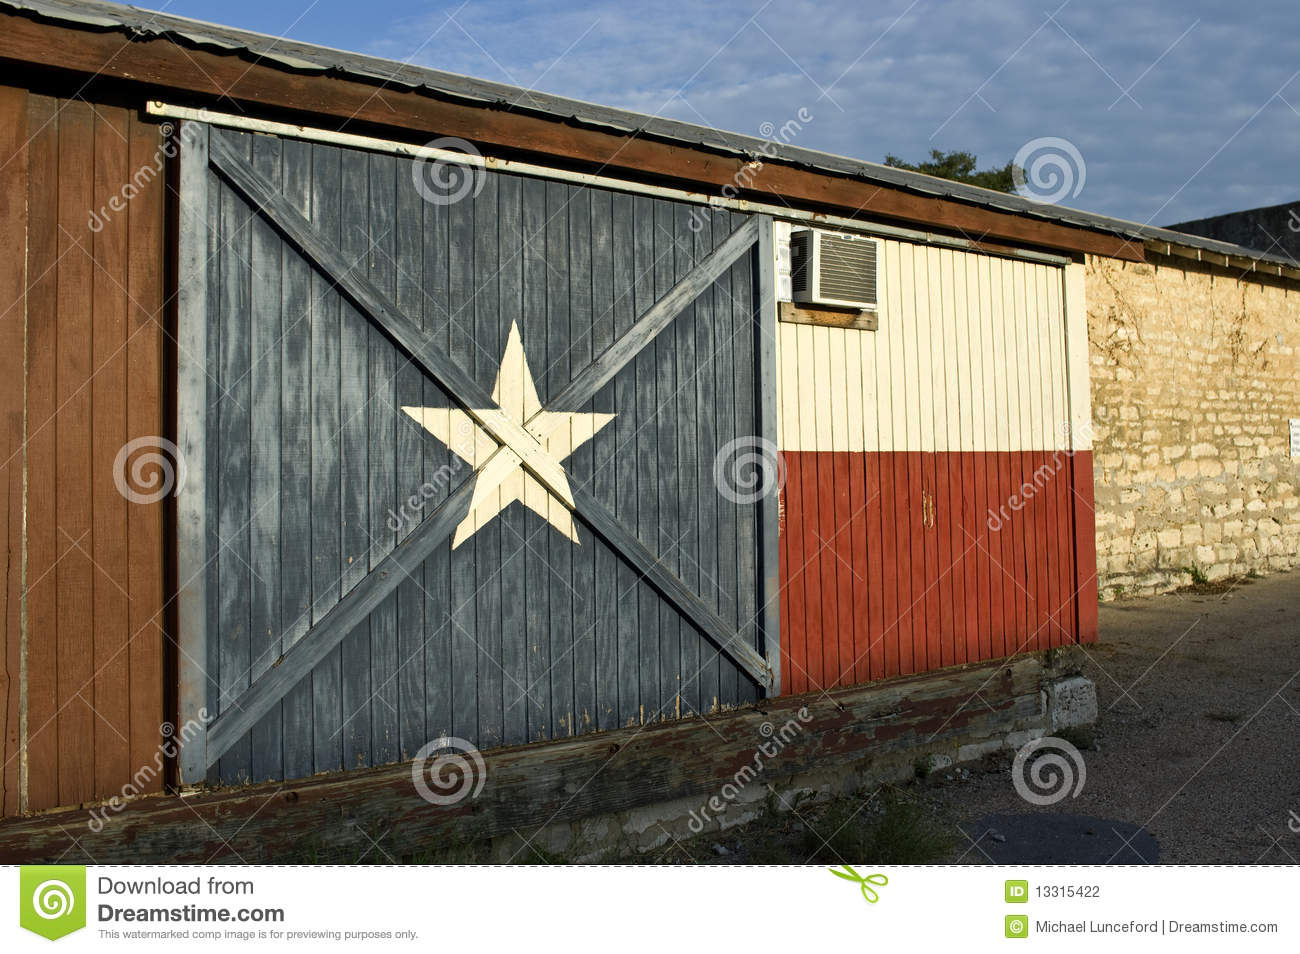 Texas Flag Painted On An Historic Building In A Small Town In Texas 